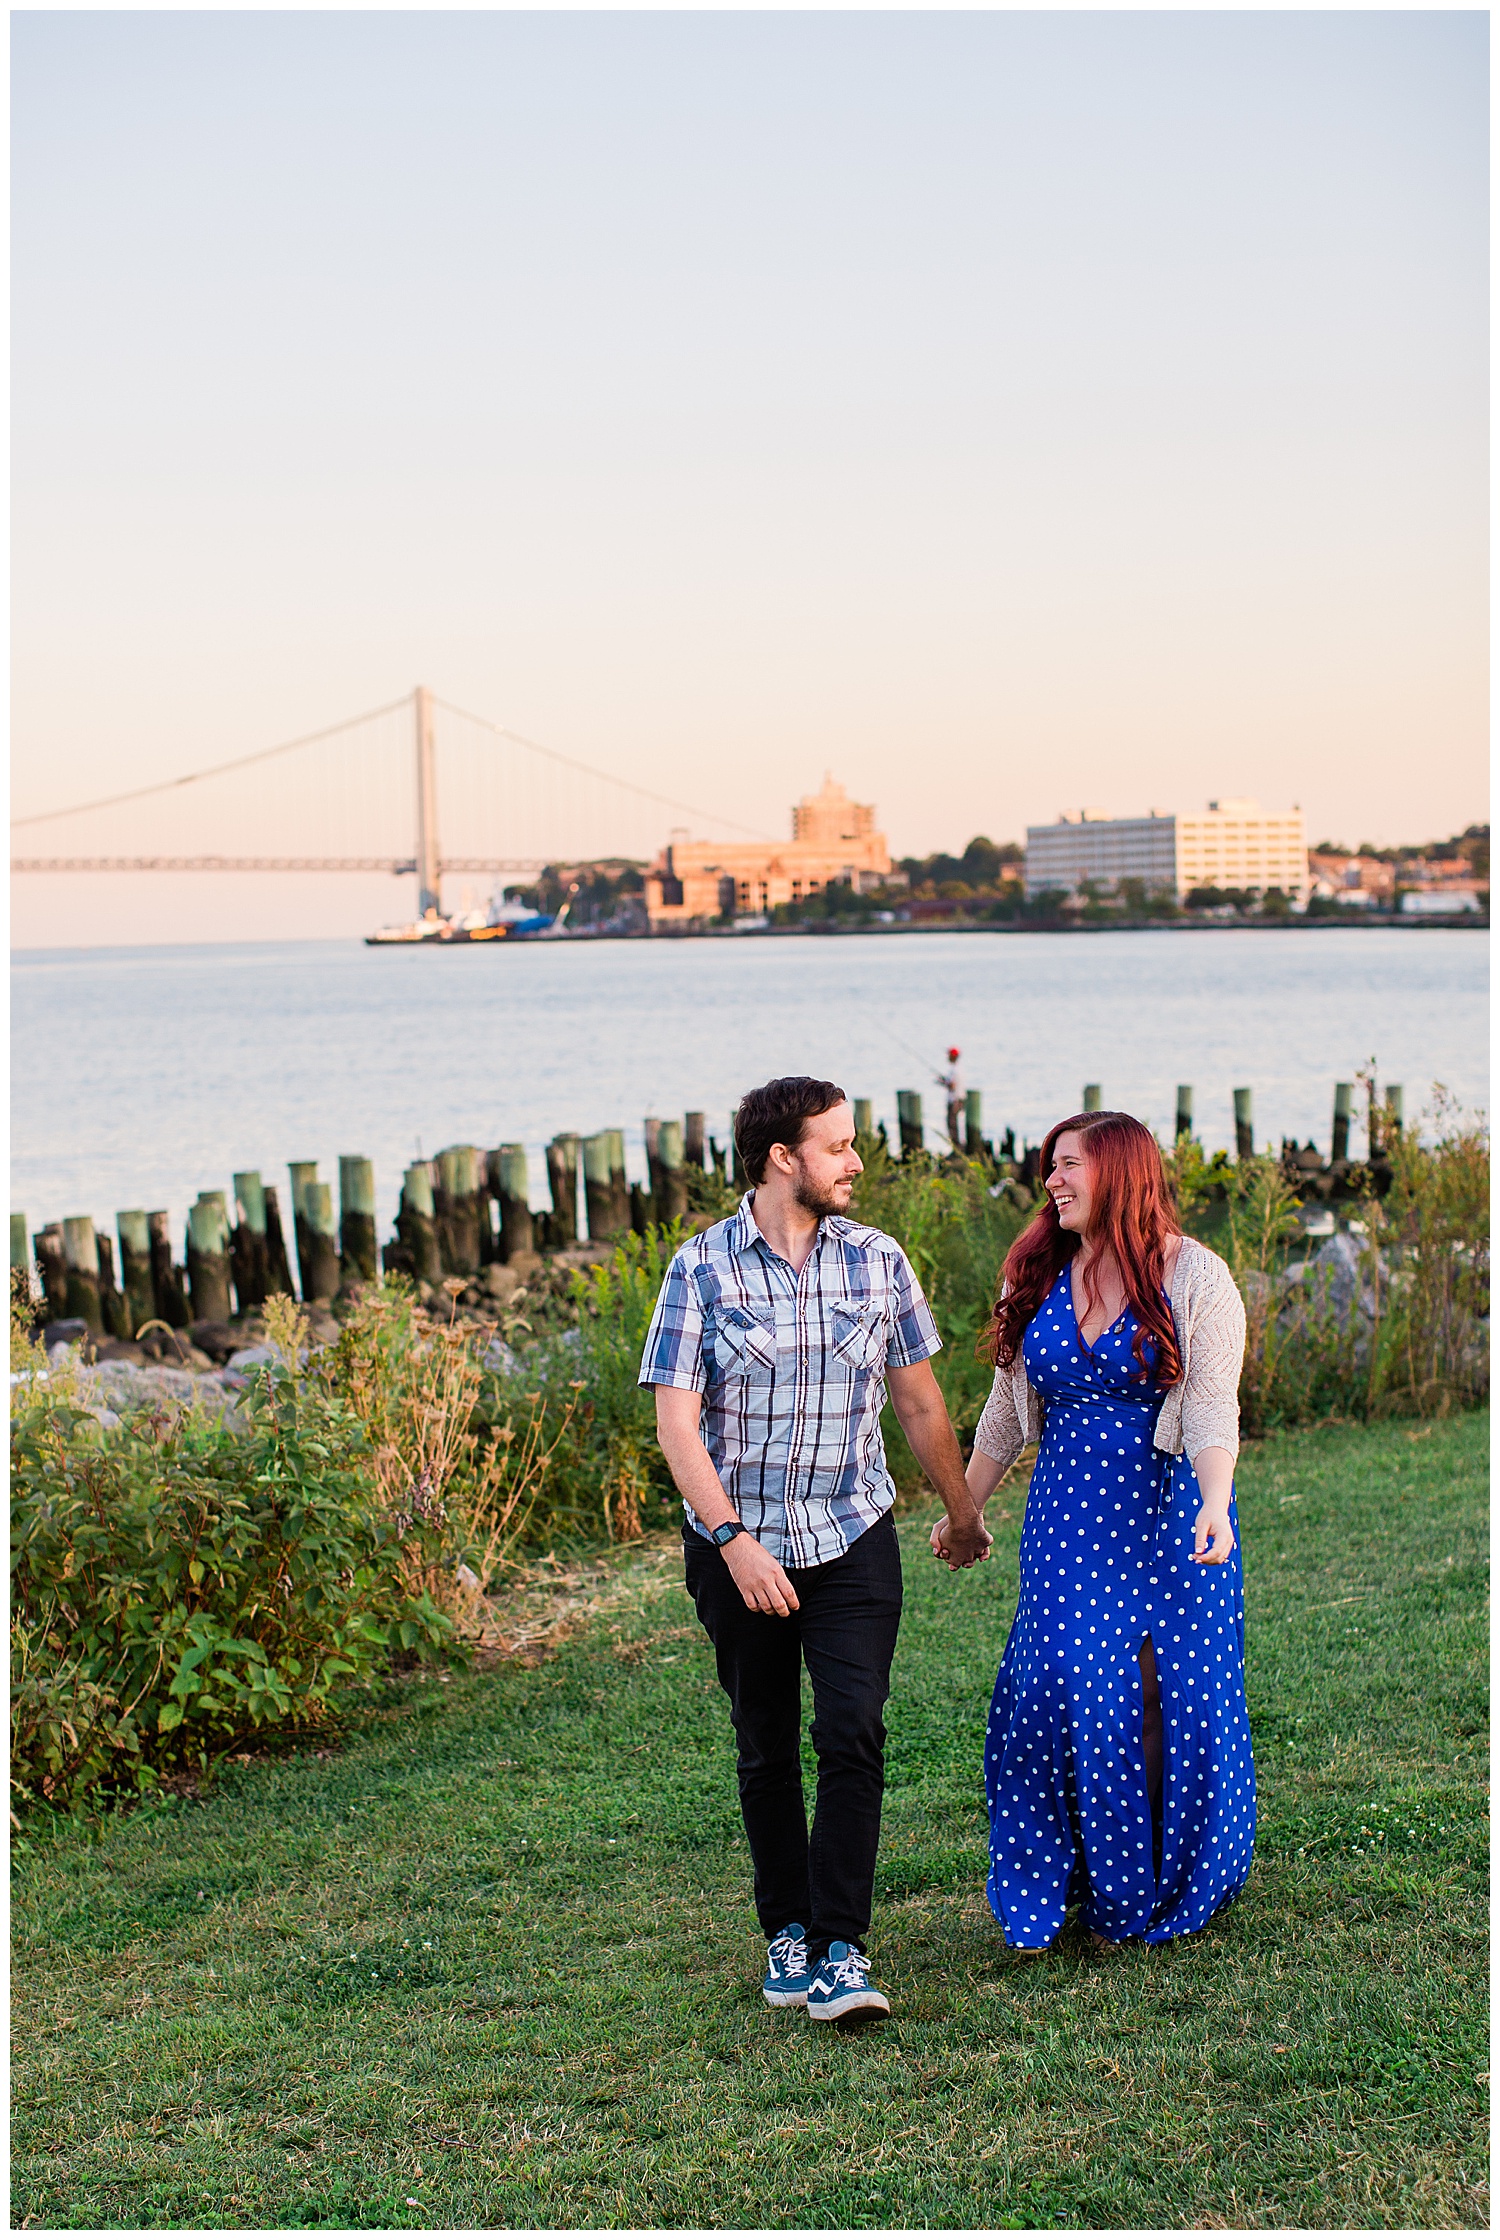 Couple holds hands in field with city bridge in sunset behind them